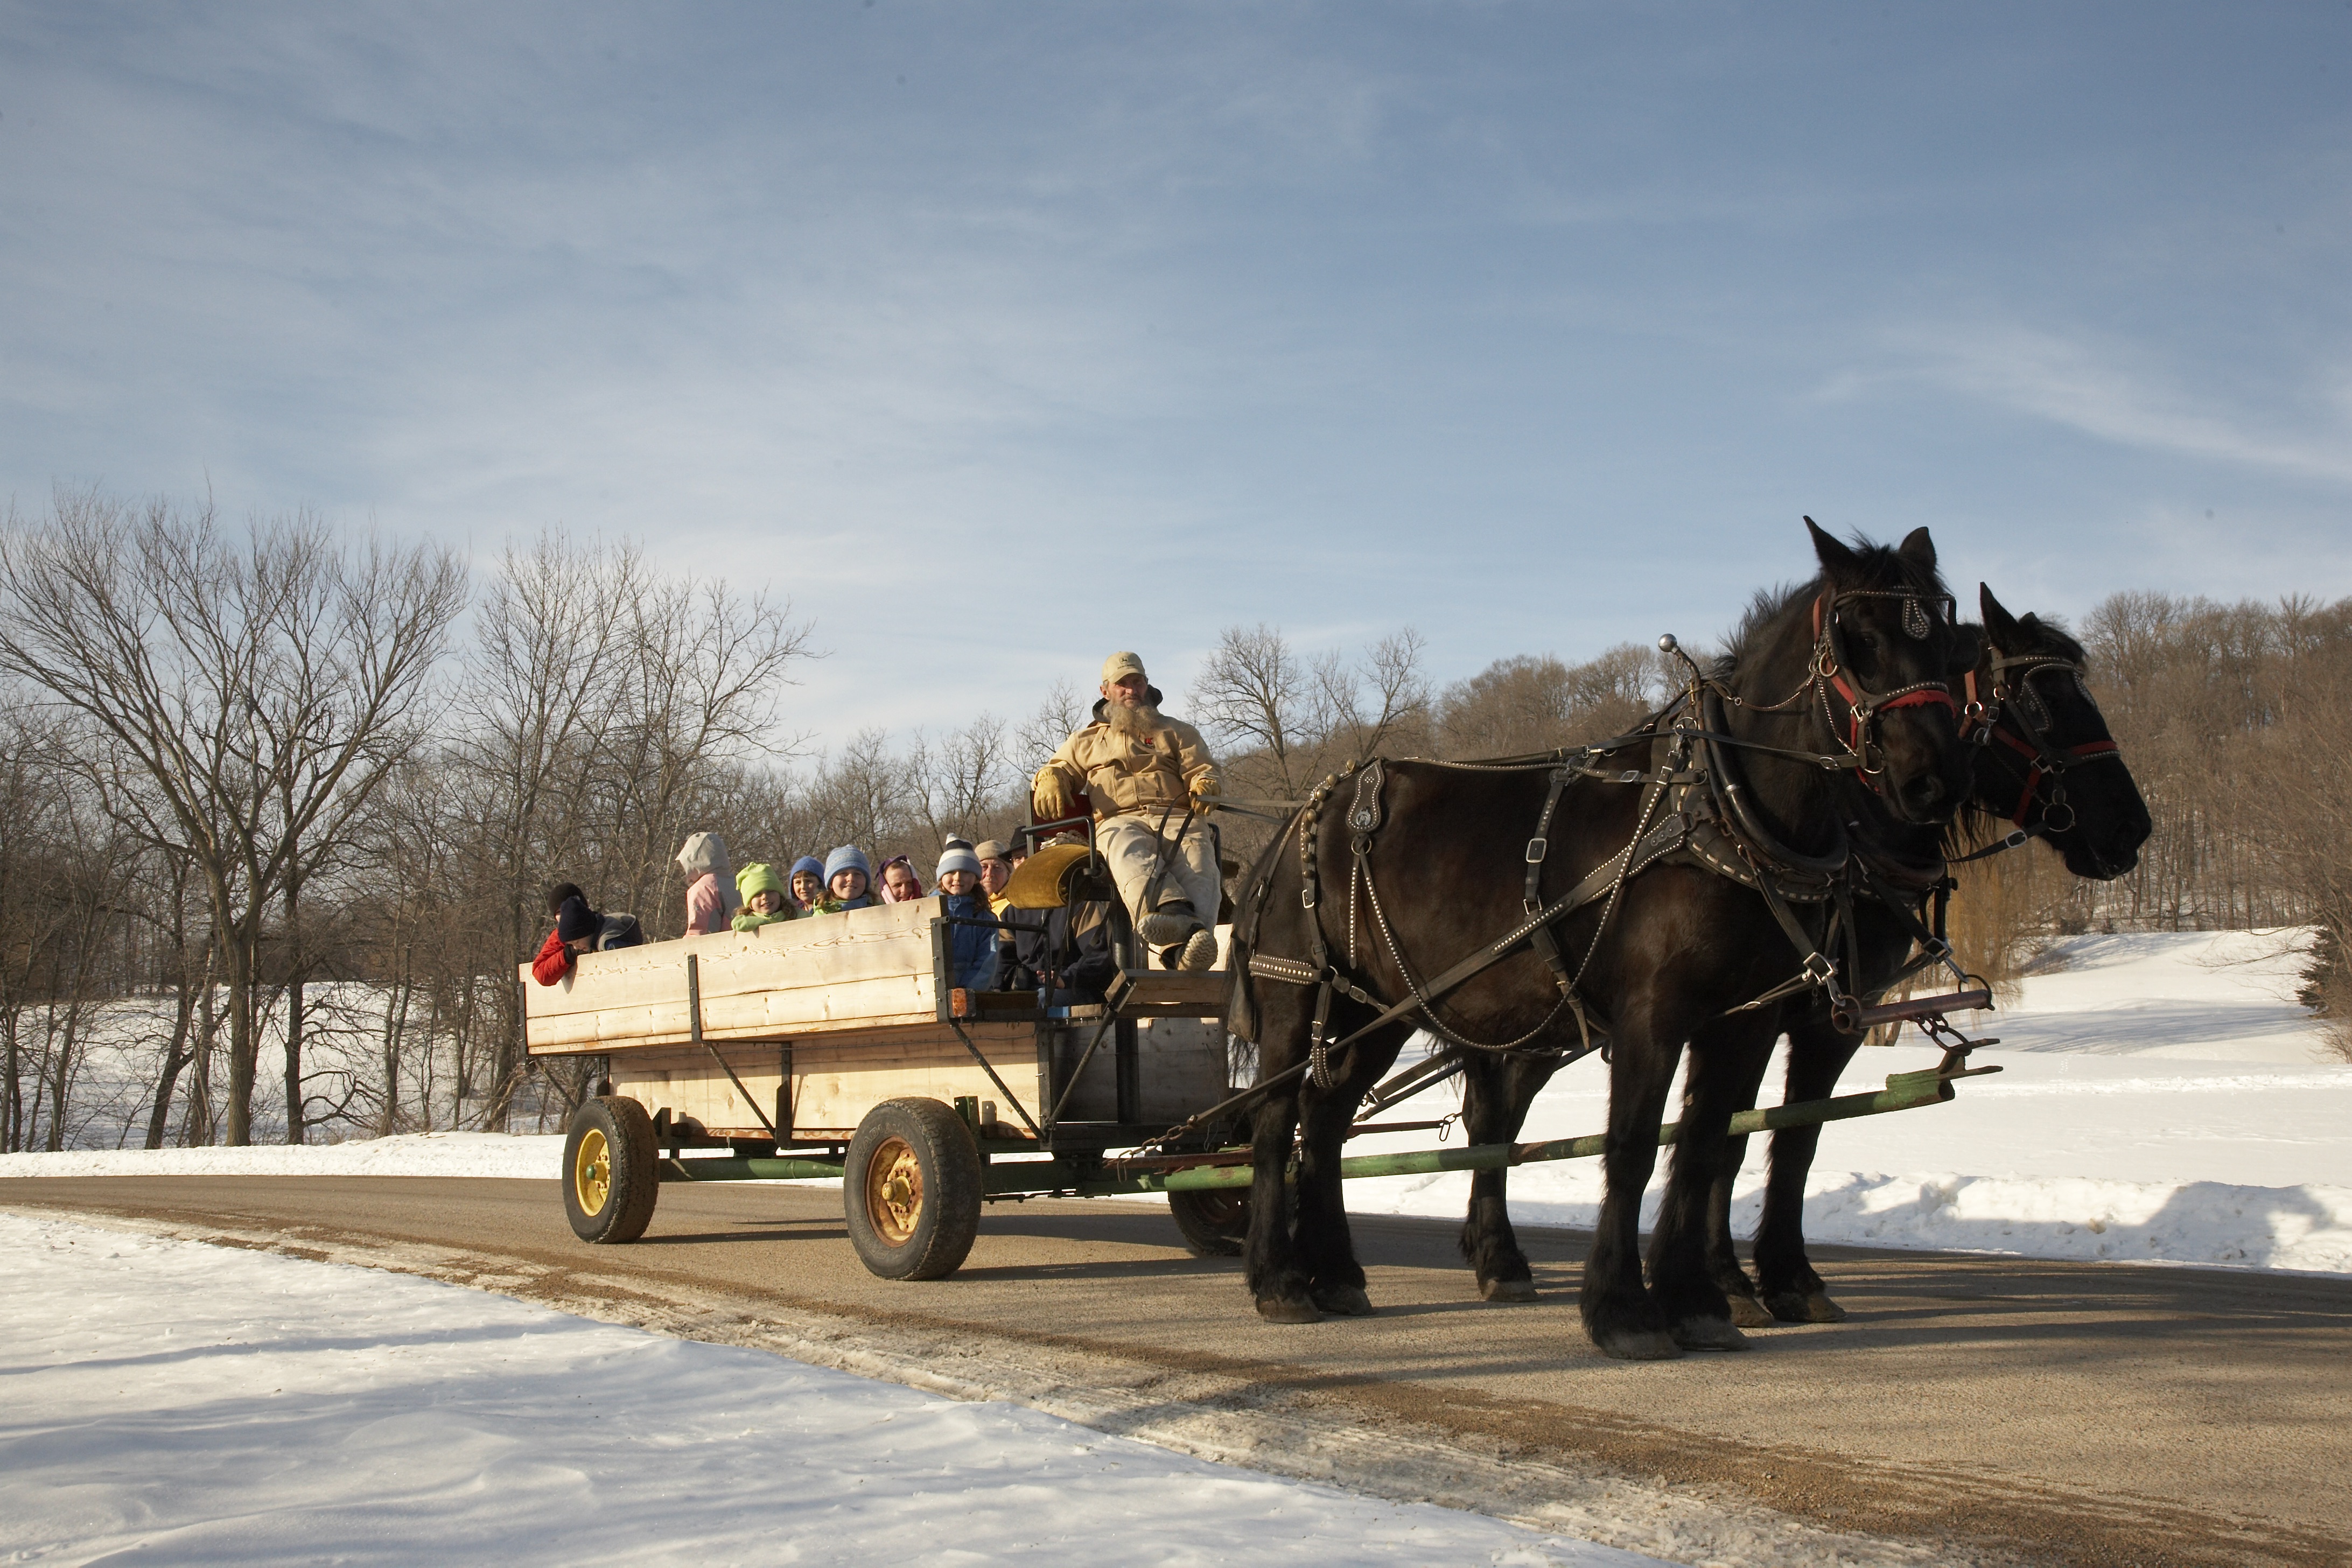 Sleigh rides with the Shenandoah Riding Center